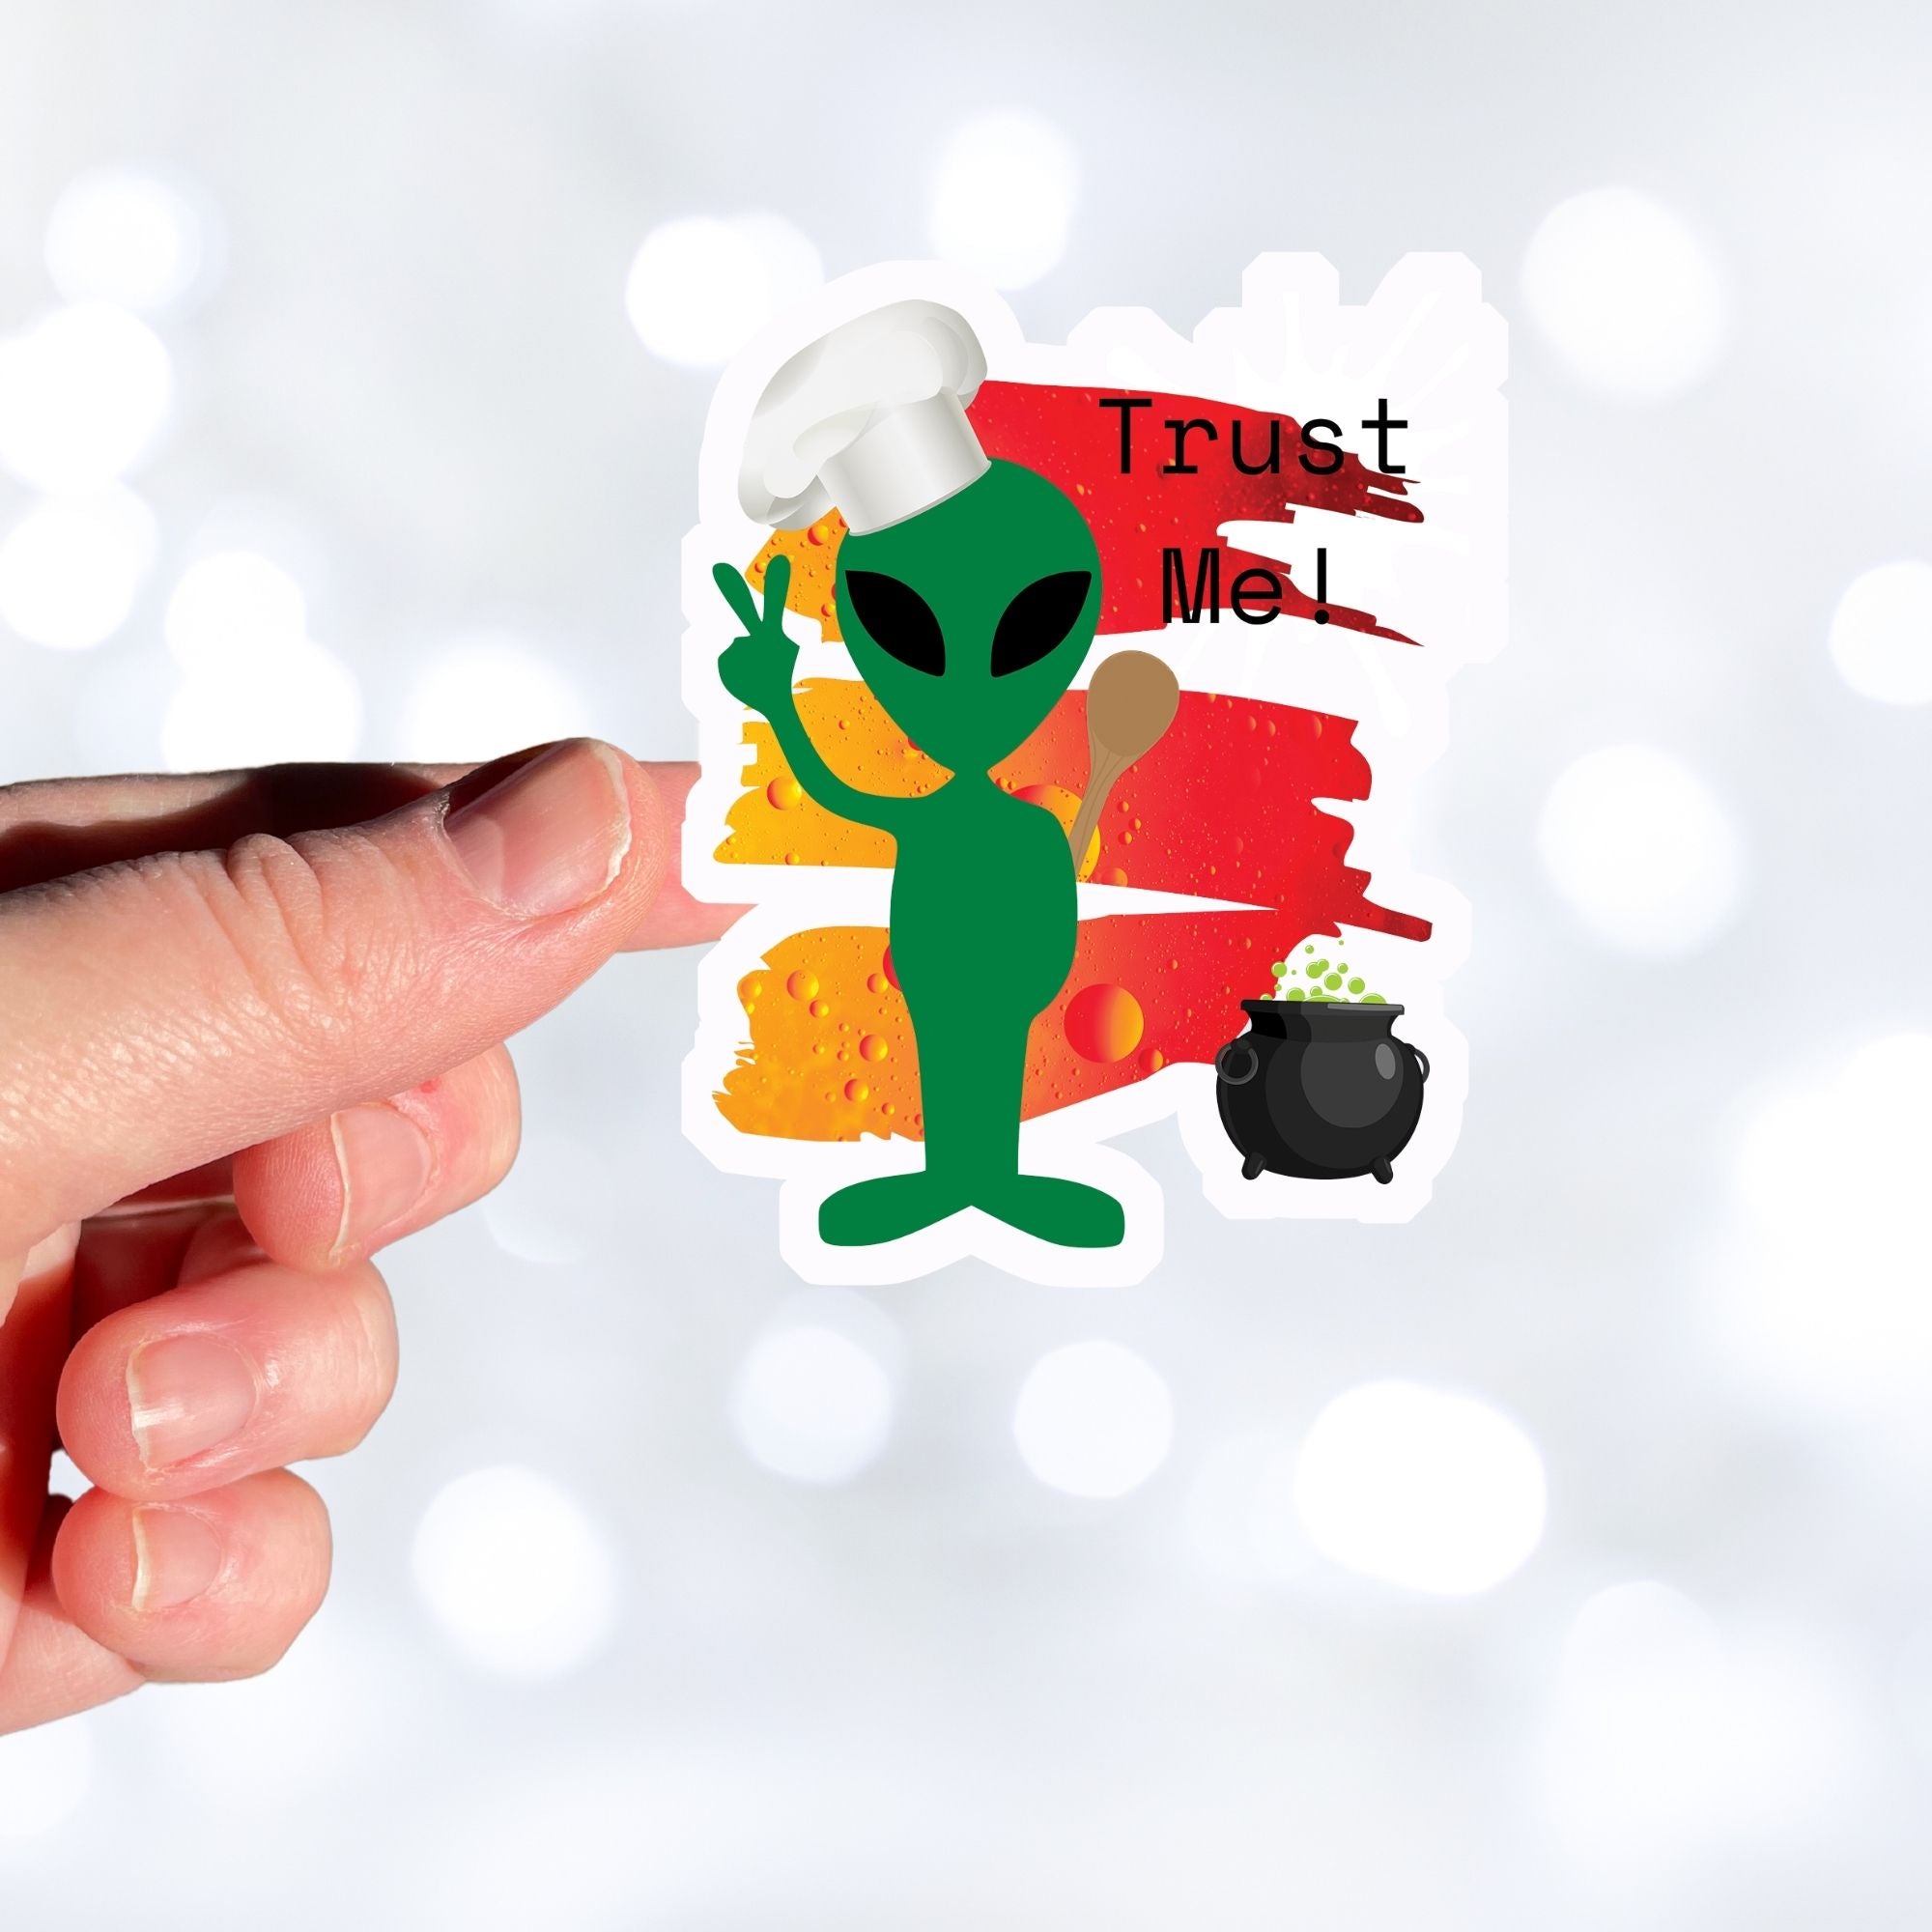 I wouldn't trust this space alien! This individual die-cut sticker features a green space alien flashing a peace sign, but wearing a chefs hat and trying to hide a wooden spoon, with a boiling pot behind, all on an orange background with the words "Trust Me!" in the upper right corner. This image shows a hand holding the trust me alien sticker.